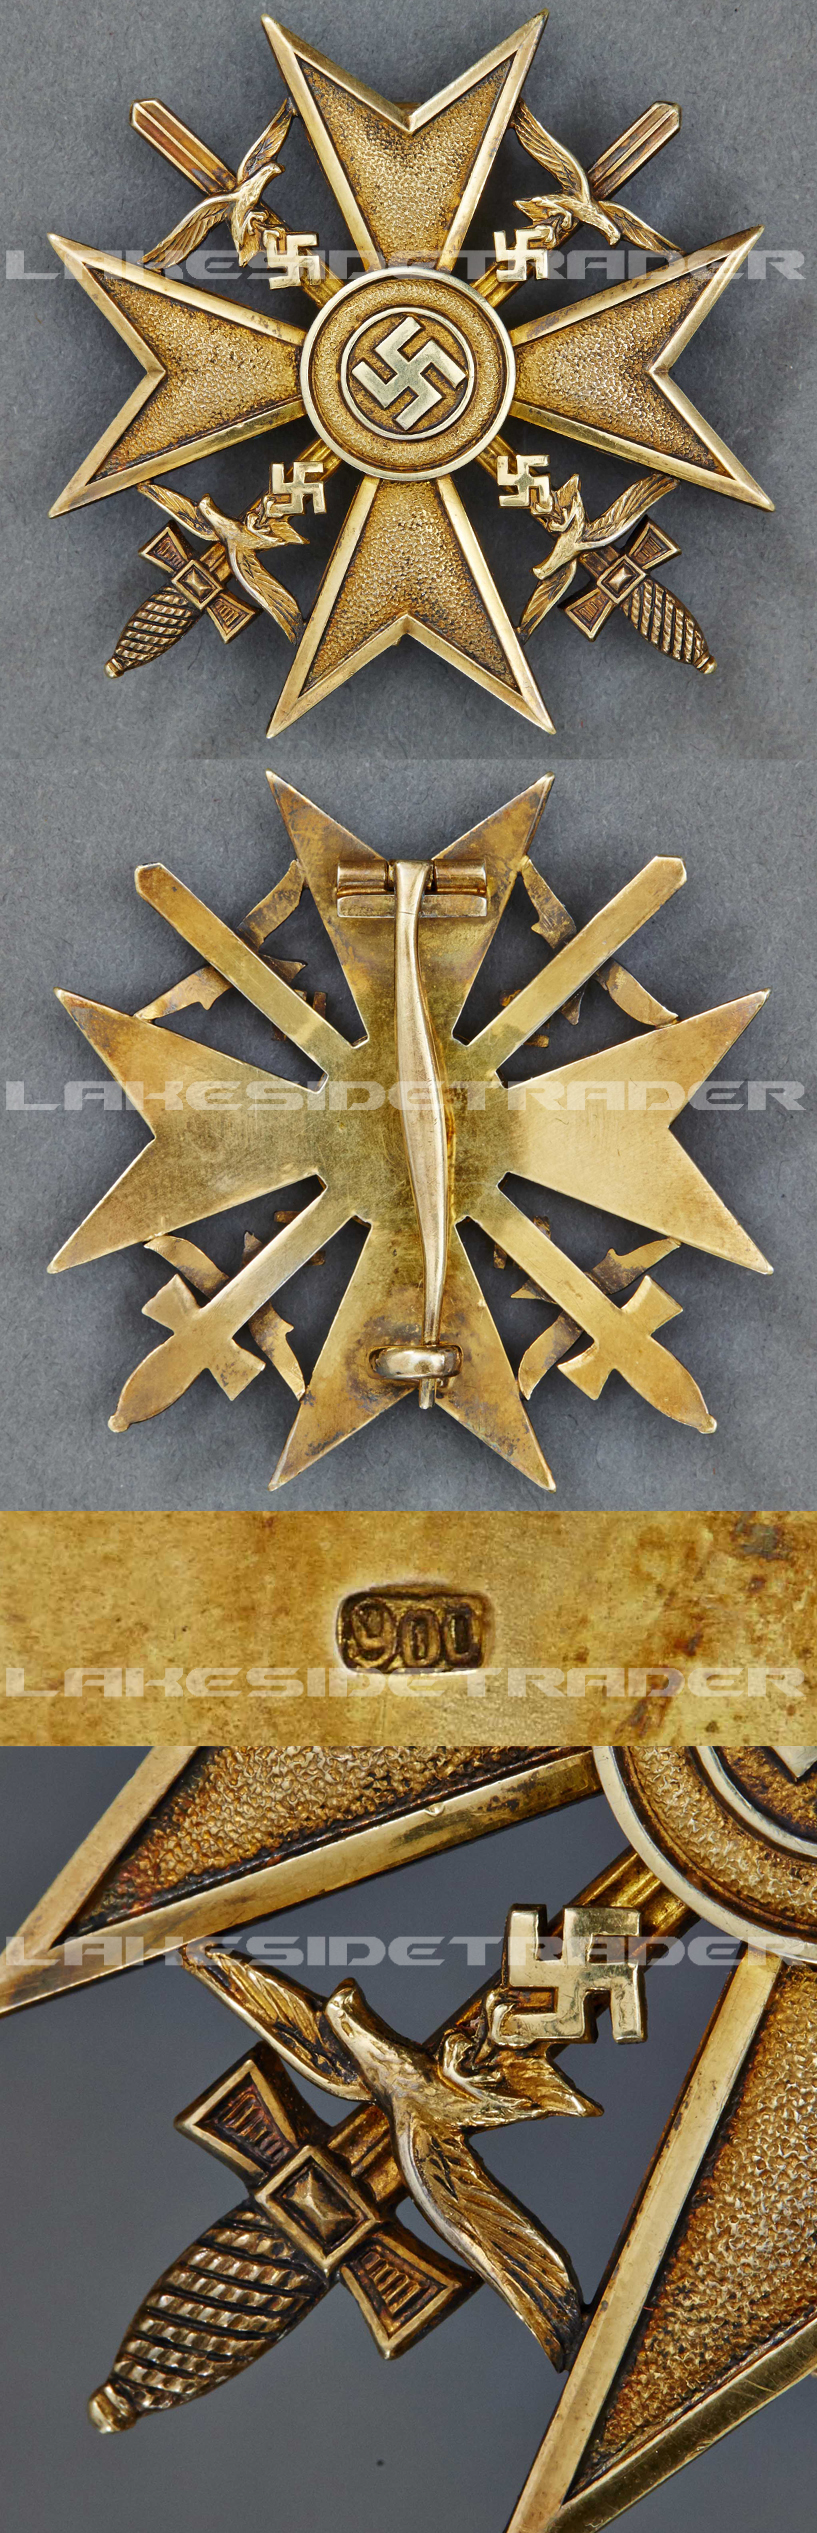 Spanish Cross in Gold with Swords 